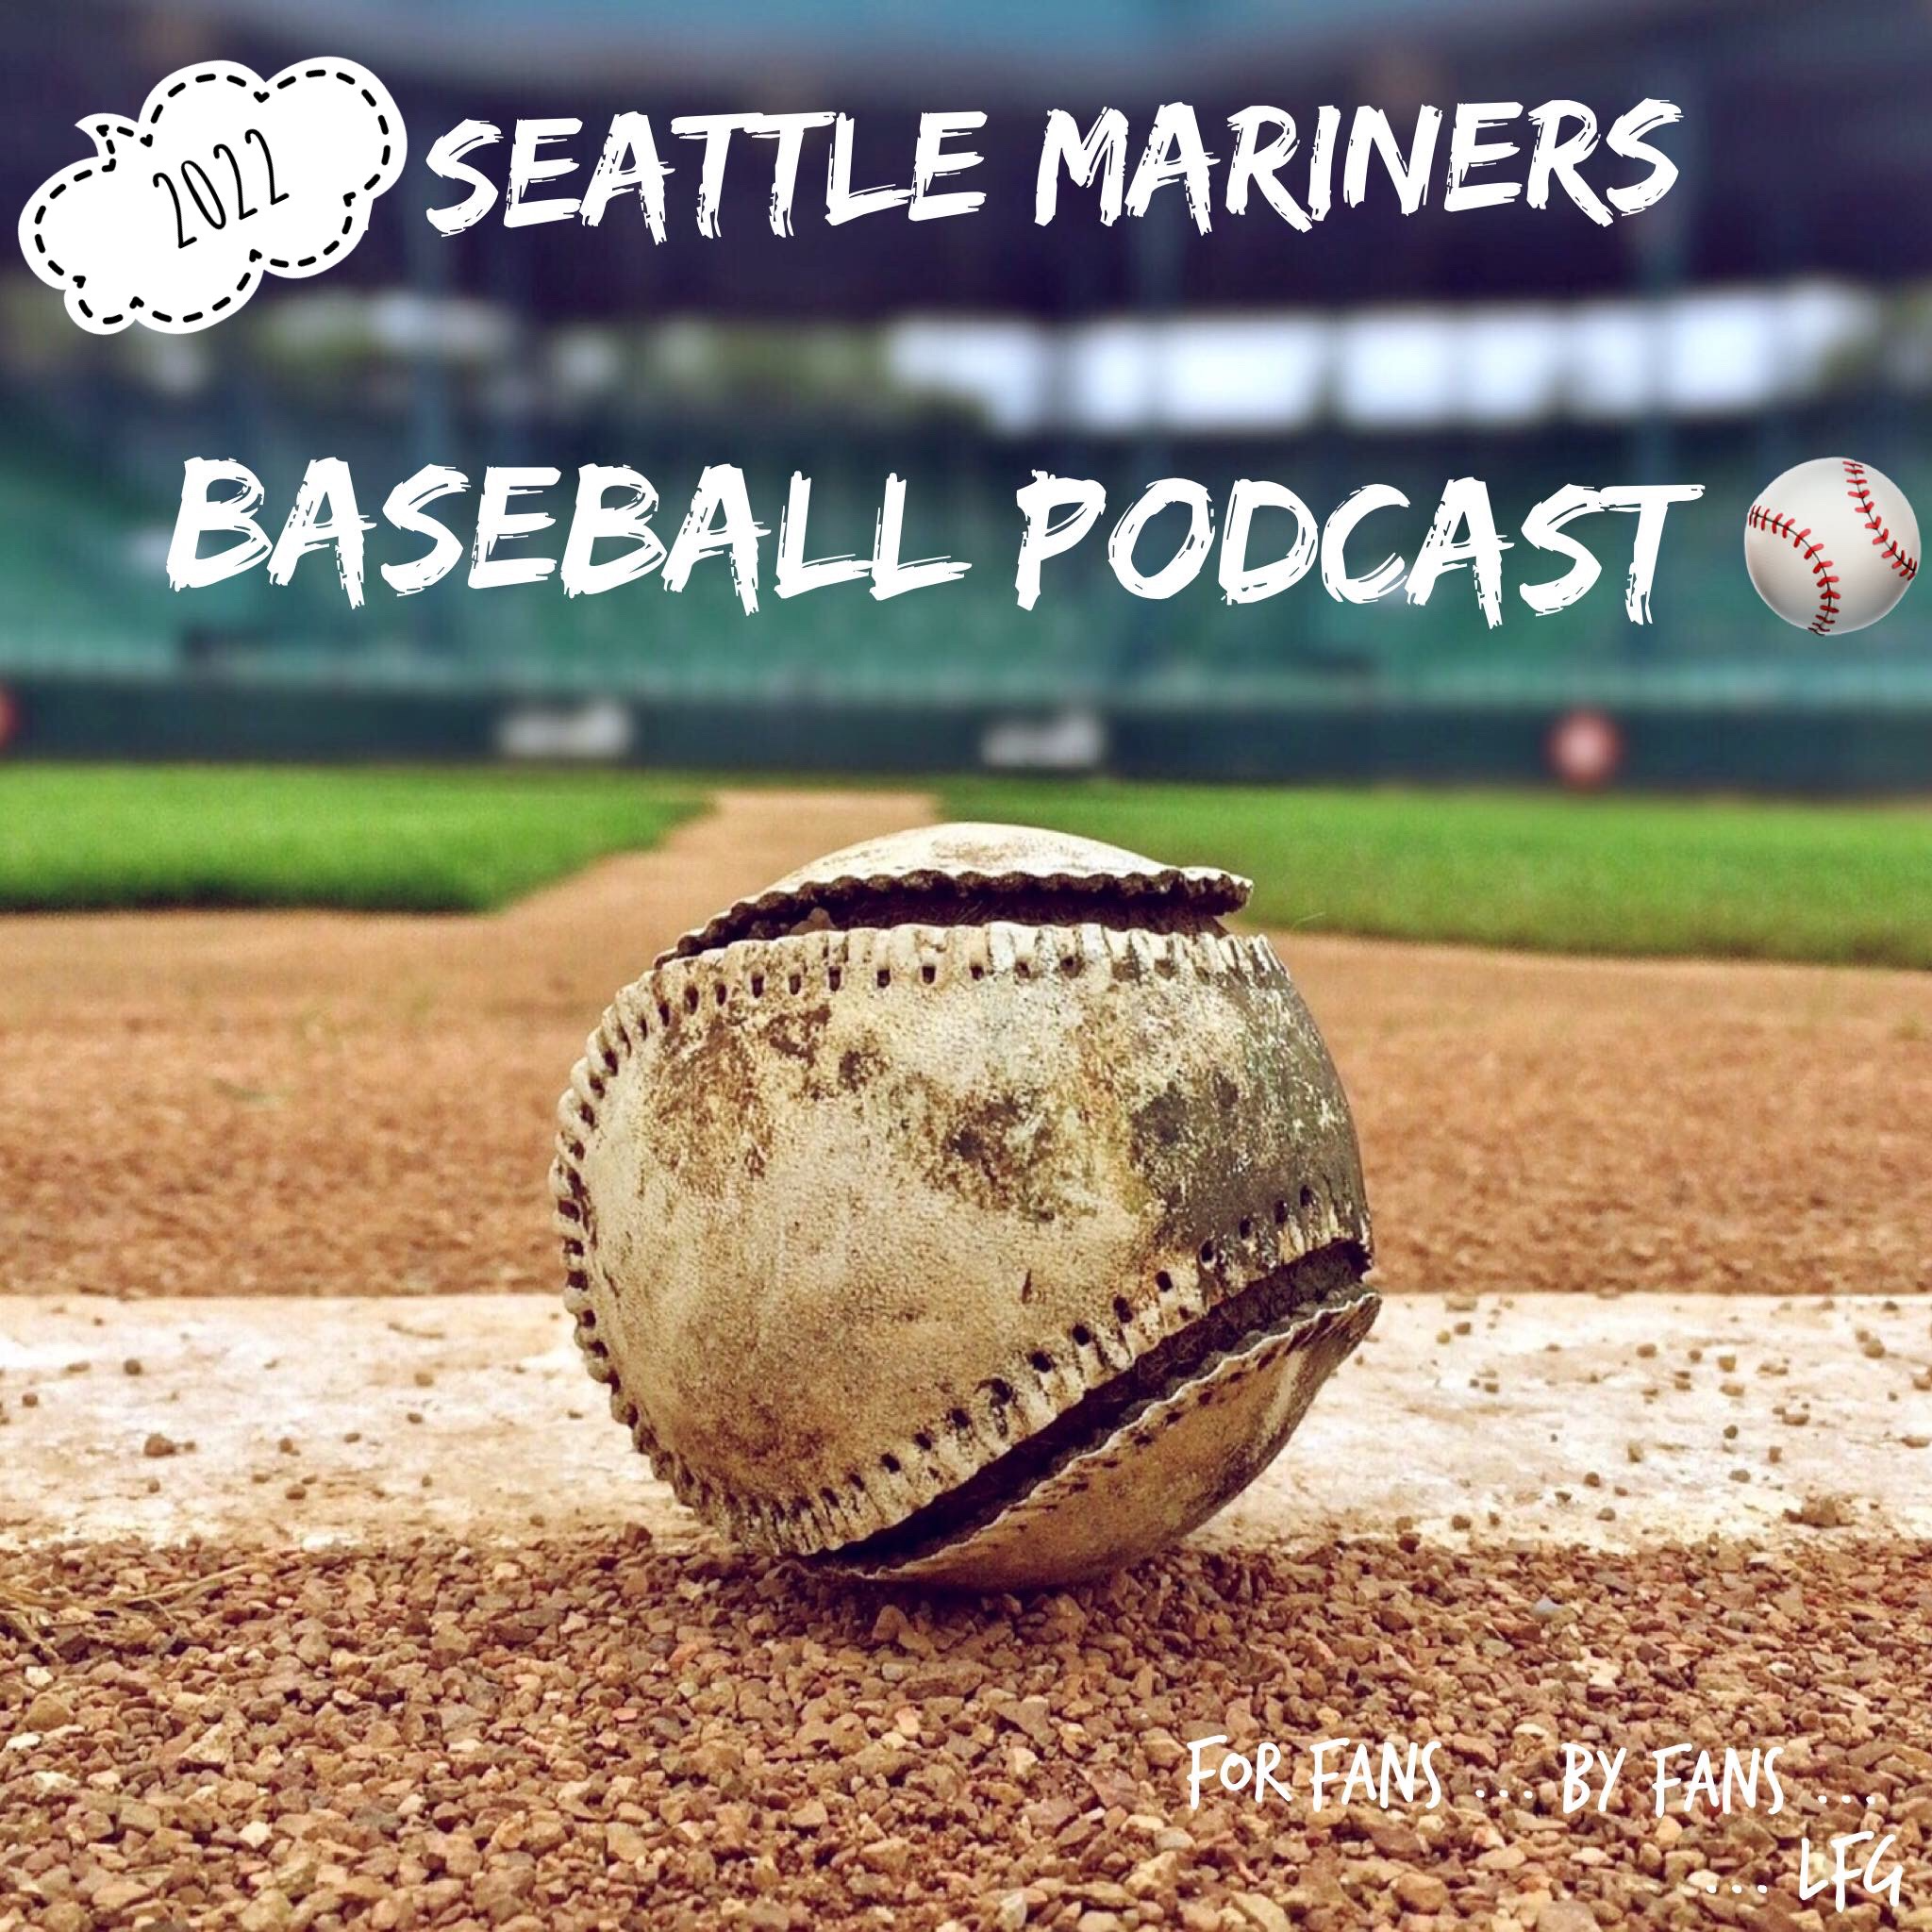 2022 Seattle Mariners Baseball Podcast "unofficial"